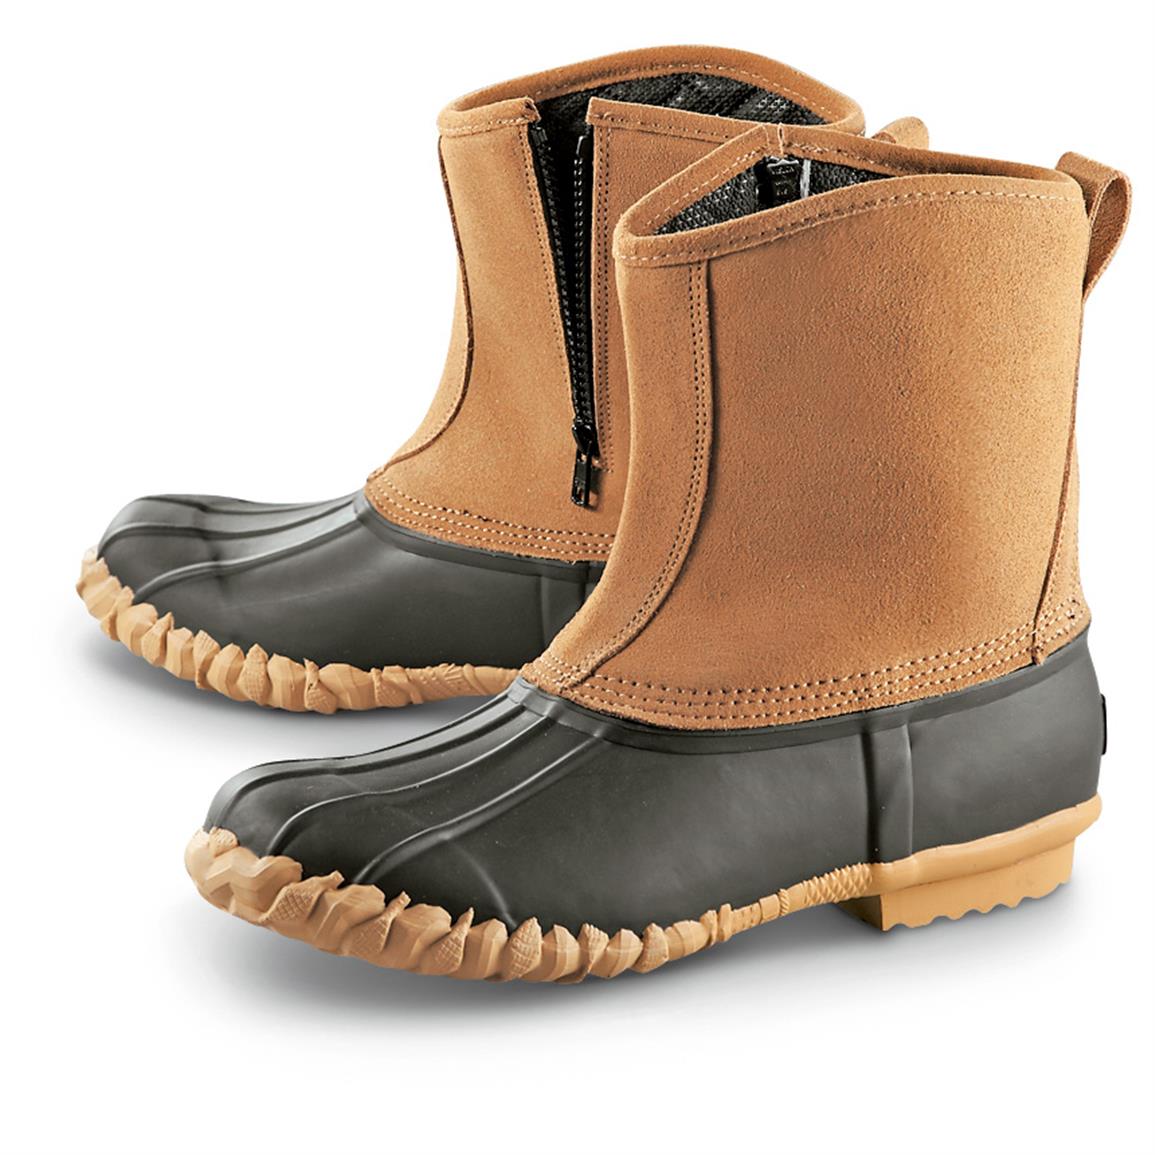 Guide Gear Side-Zip Insulated Duck Boots - 618214, Winter & Snow Boots